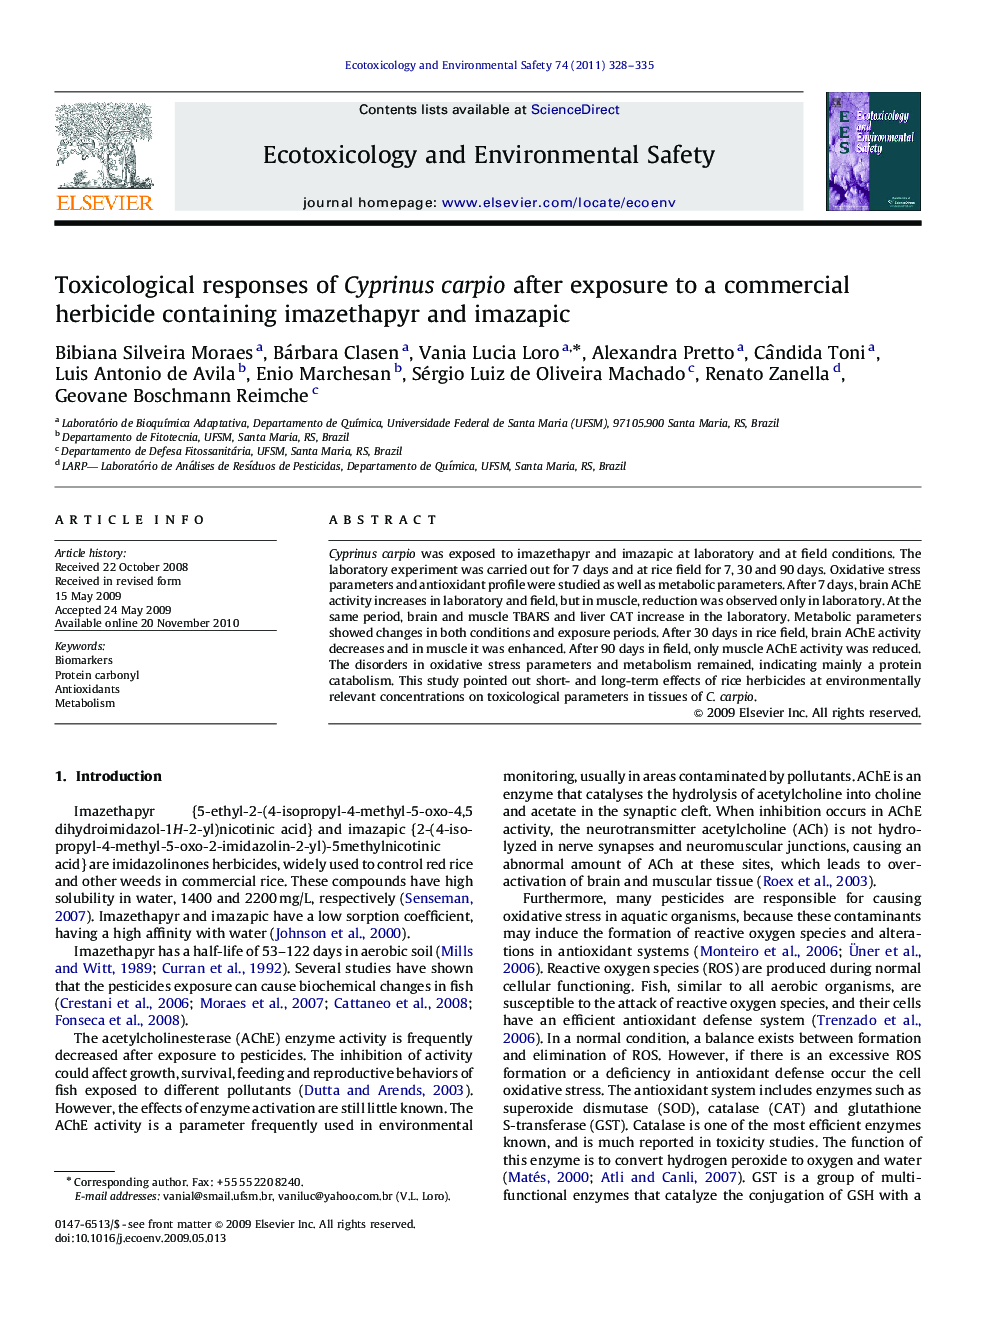 Toxicological responses of Cyprinus carpio after exposure to a commercial herbicide containing imazethapyr and imazapic